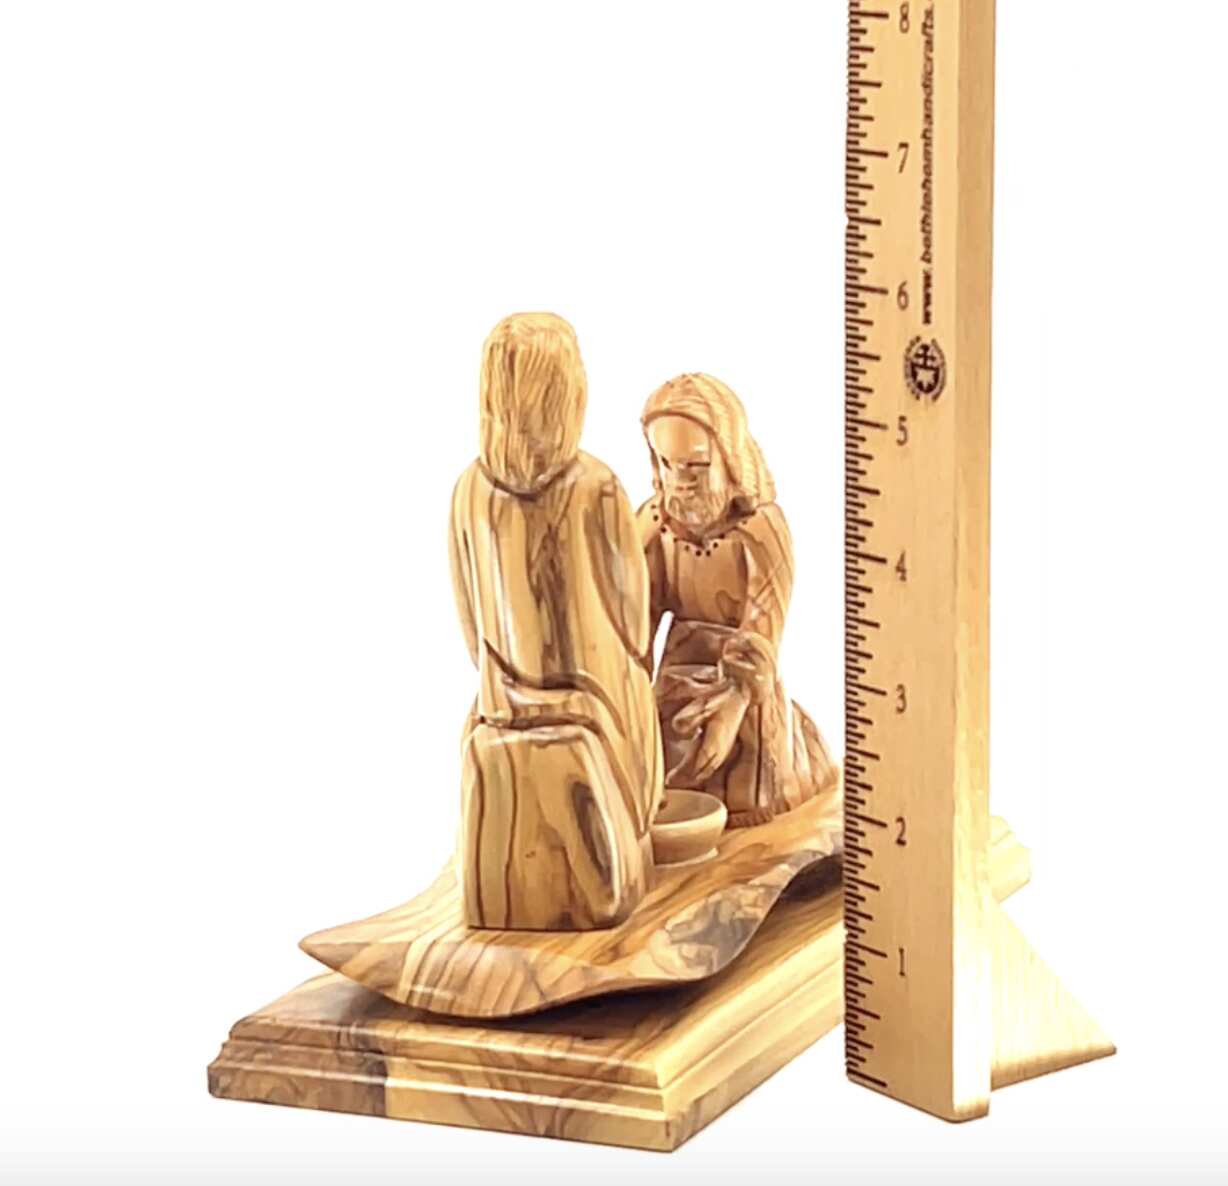 Jesus Christ "Washing of the Feet" Sculpture, 7.5" Carving from Holy Land Olive Wood